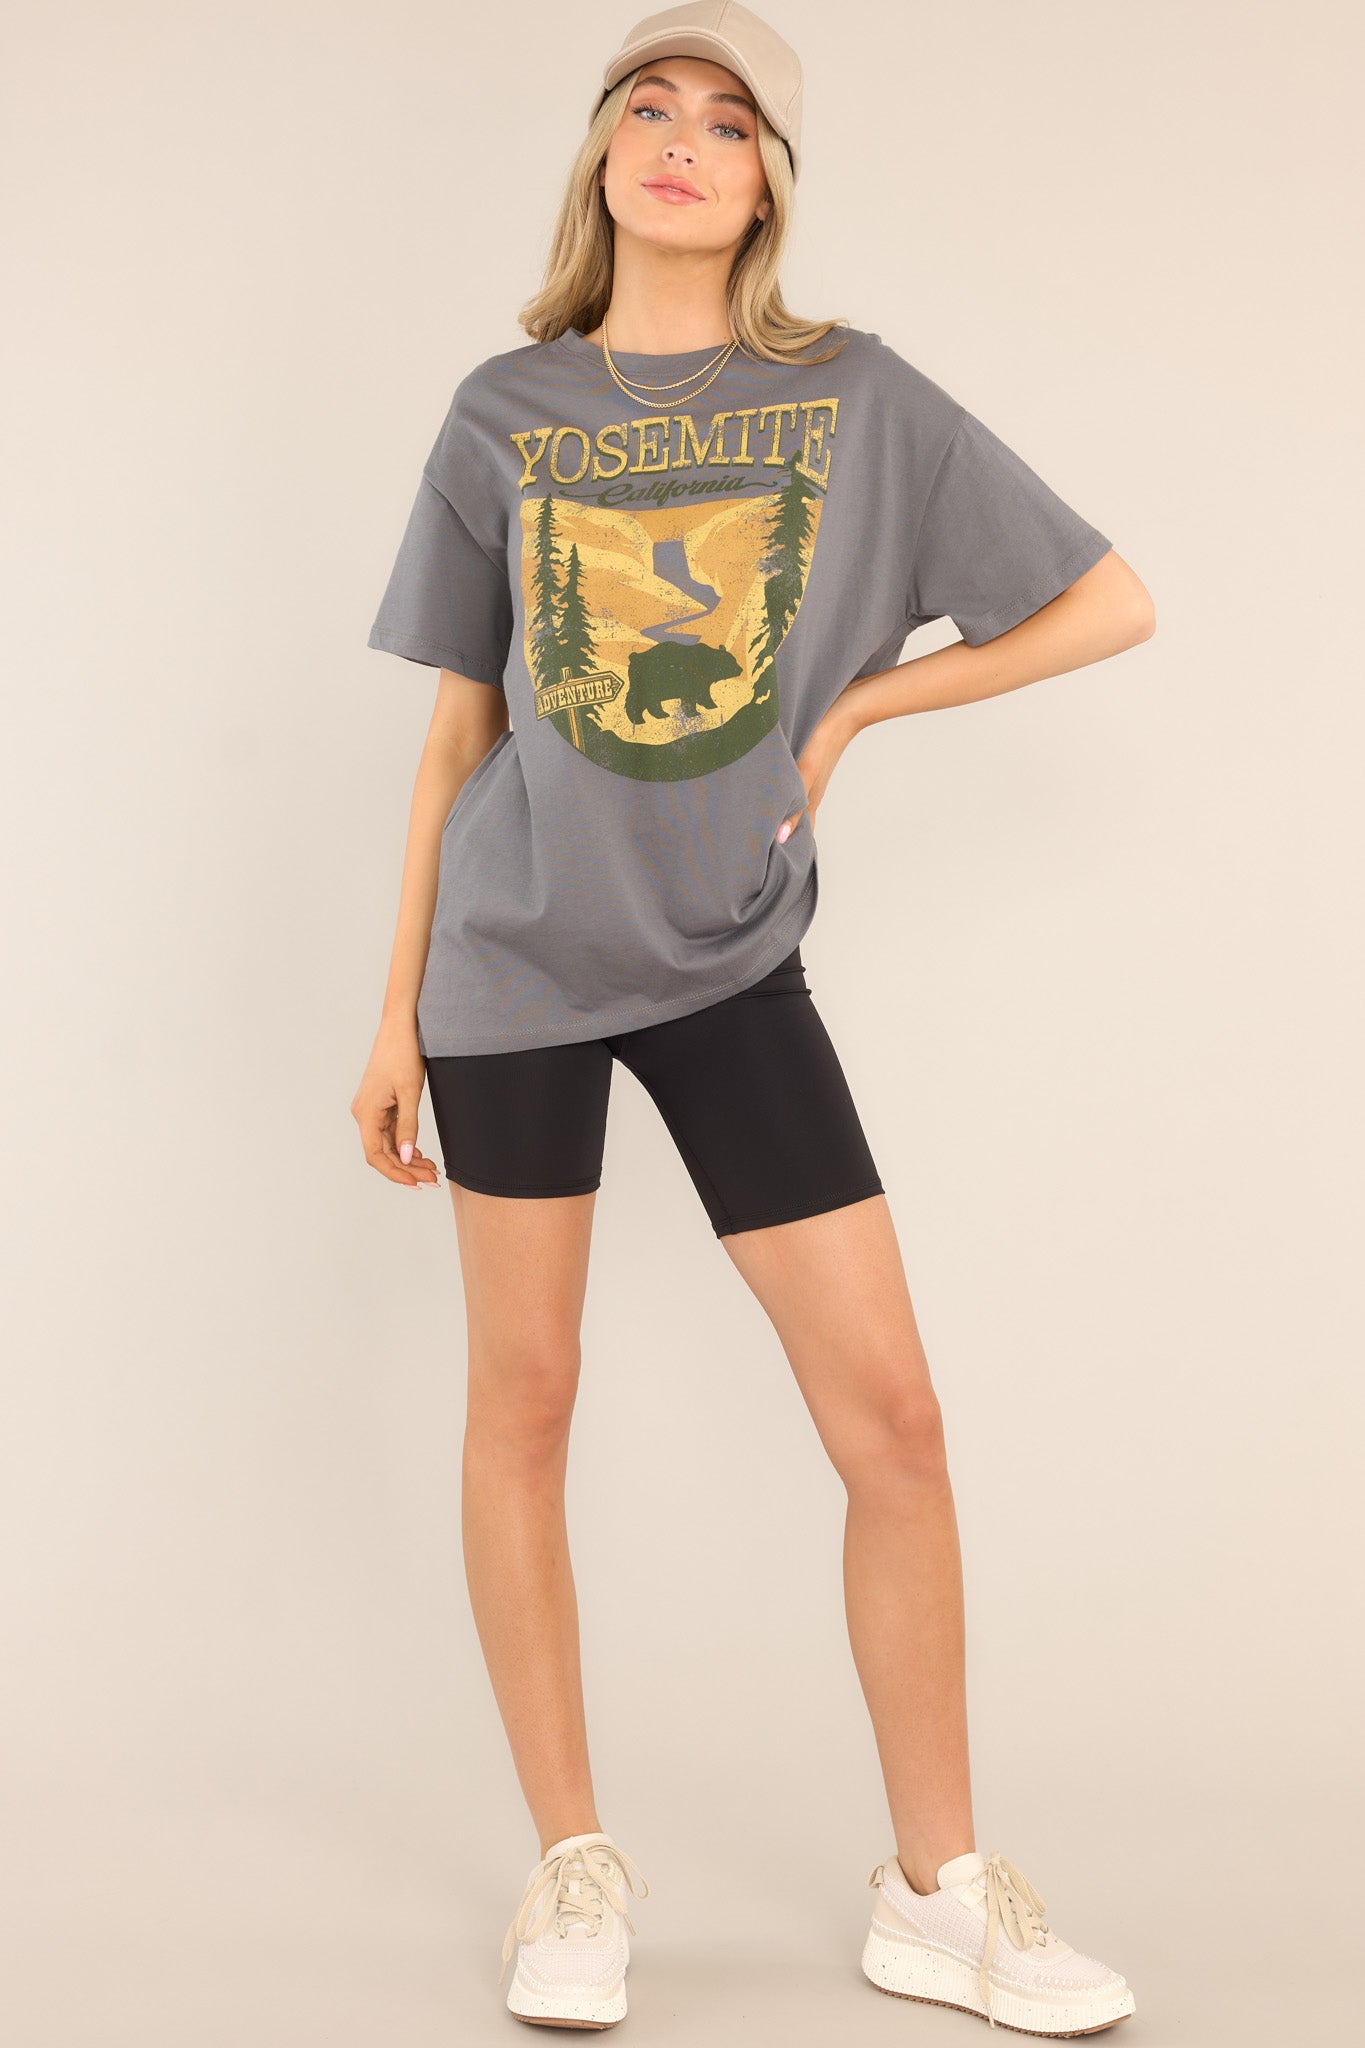 This grey top features a crew neckline, dropped shoulders, a mountain graphic, and short sleeves.